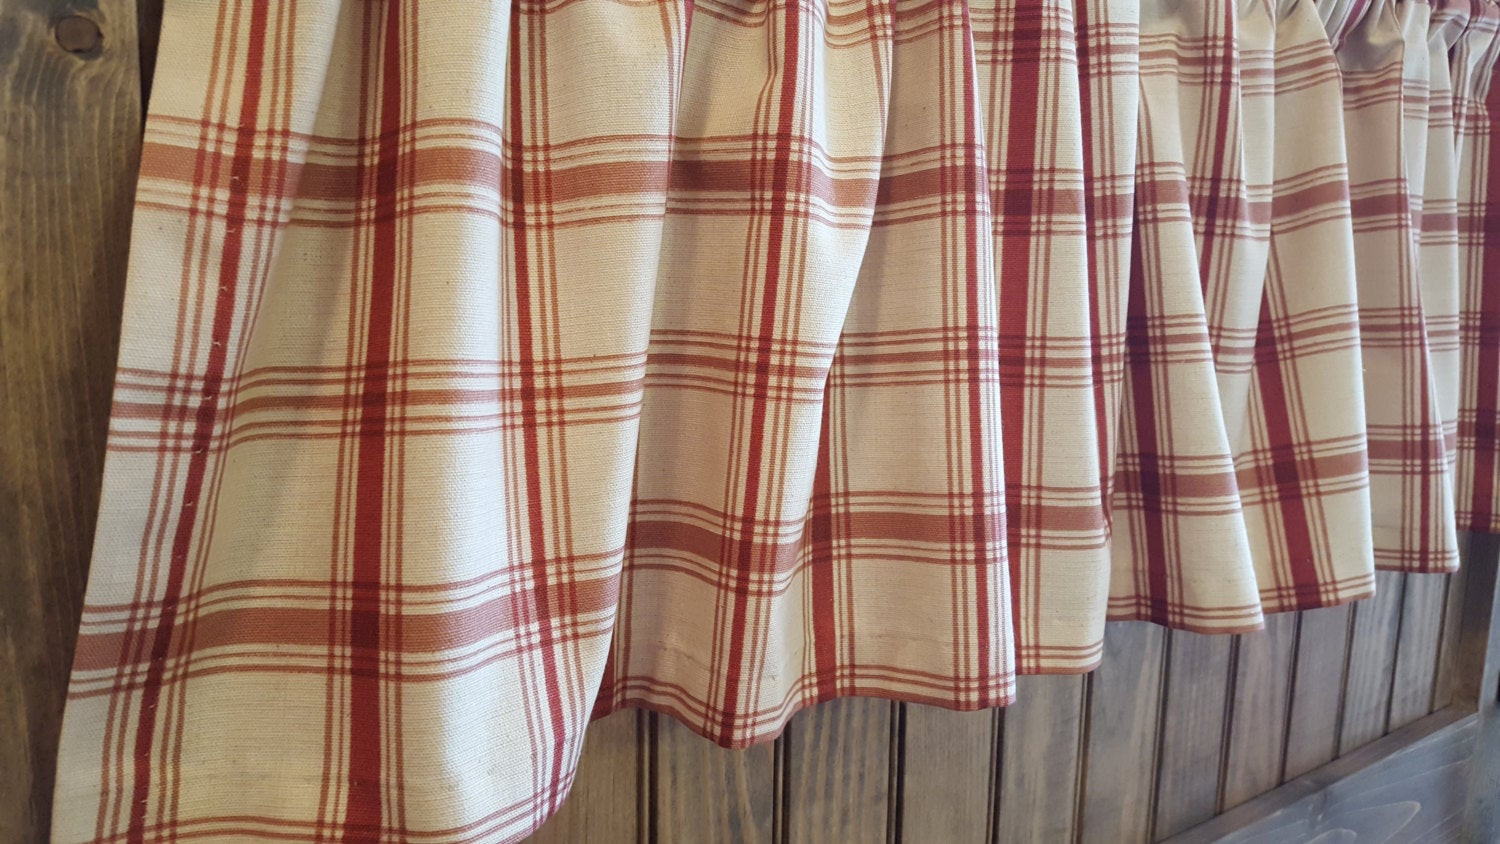 Plaid Kitchen Curtains
 Crimson Red Plaid Kitchen Cafe Curtains for Country Farmhouse